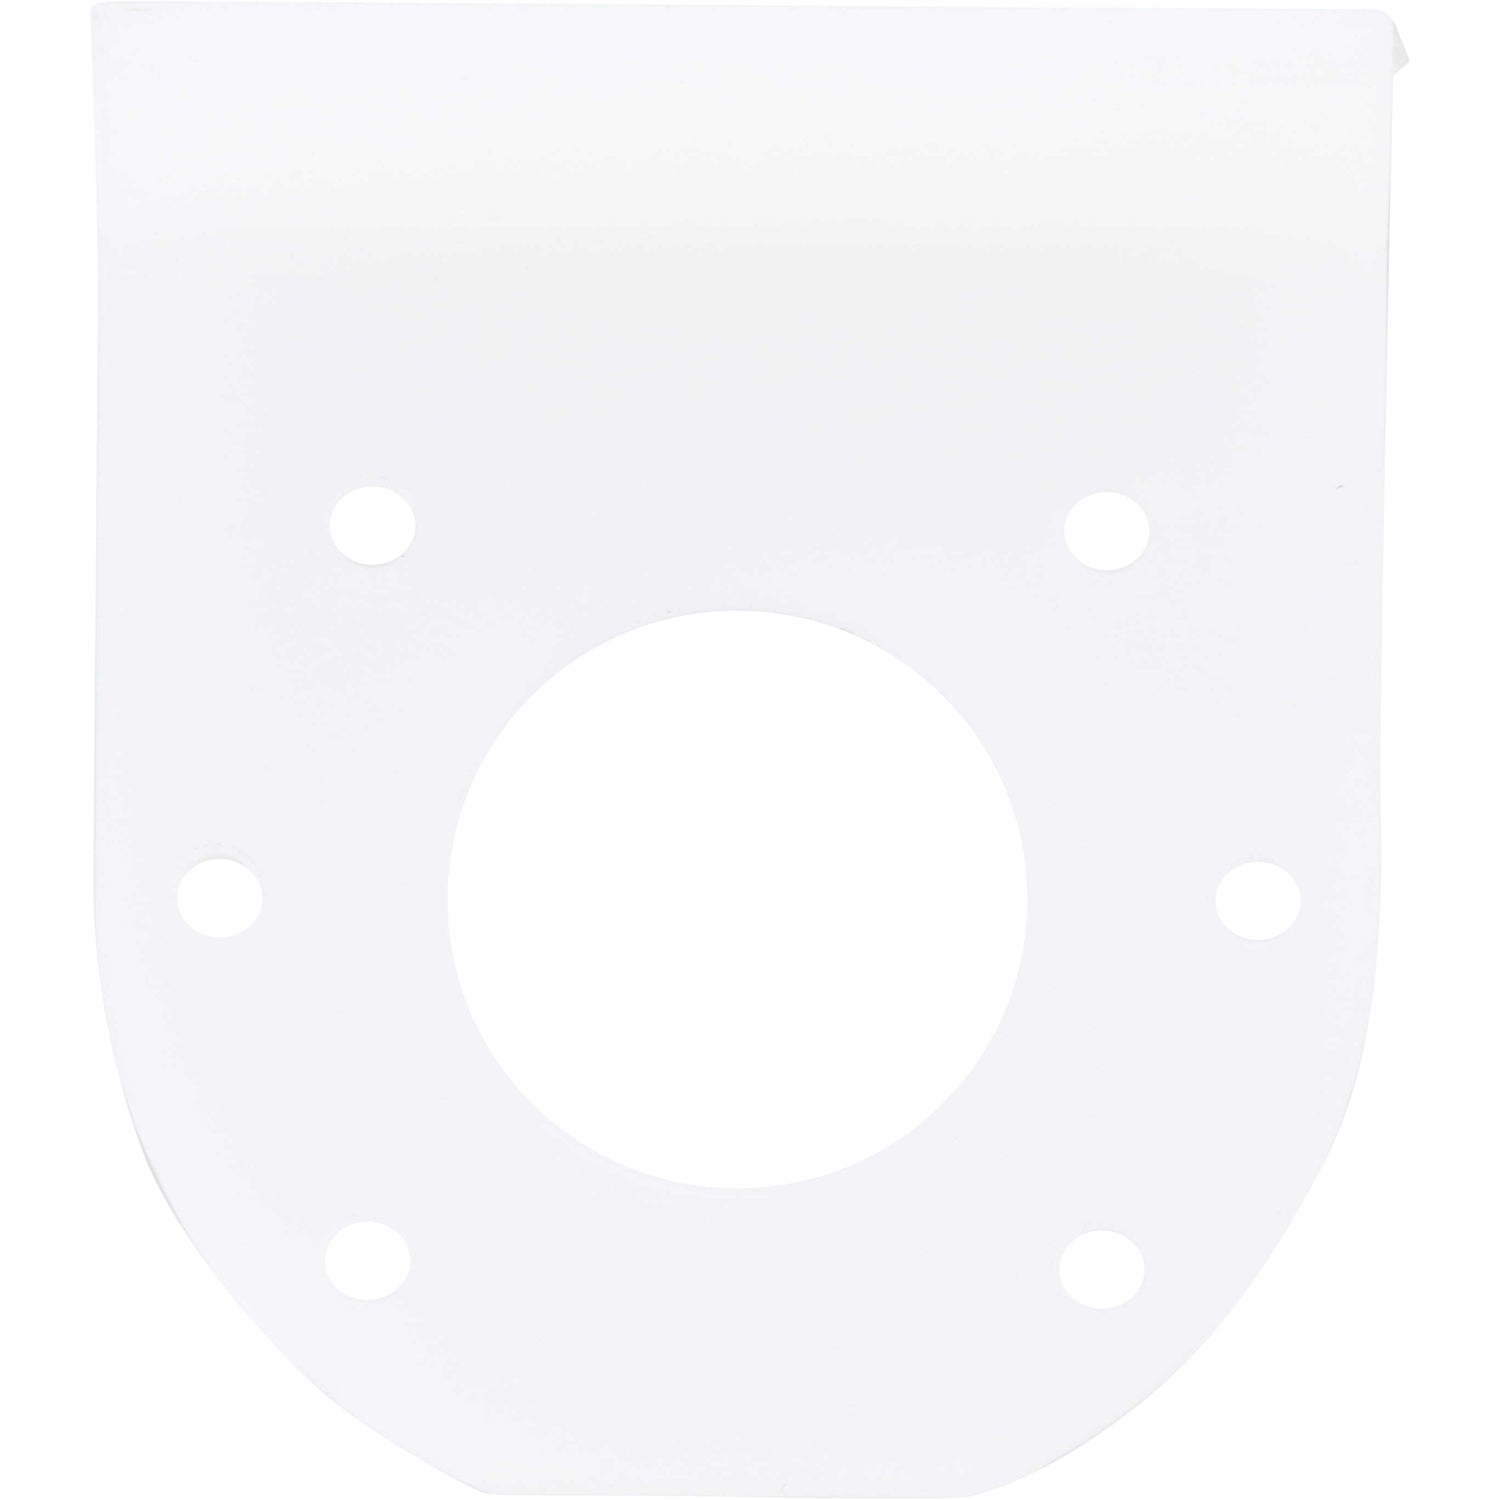 White machined plastic wedge part with four small mounting holes and one larger center hole. Part shown on white background.